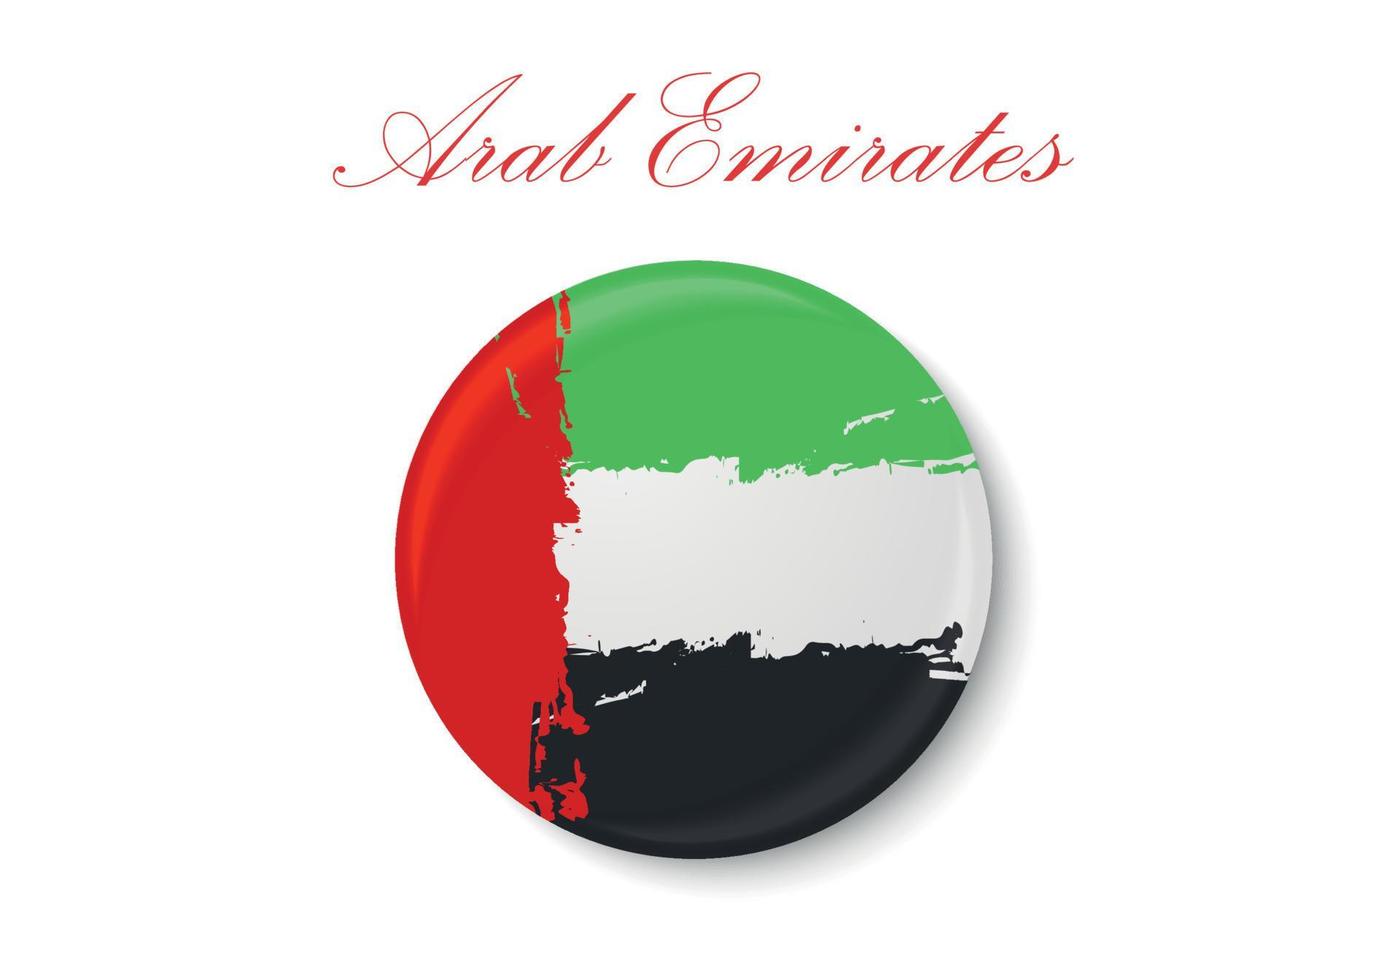 The flag of Arab Emirates. Standard color. The circular icon. The round flag. Digital illustration. Computer illustration. Vector illustration.